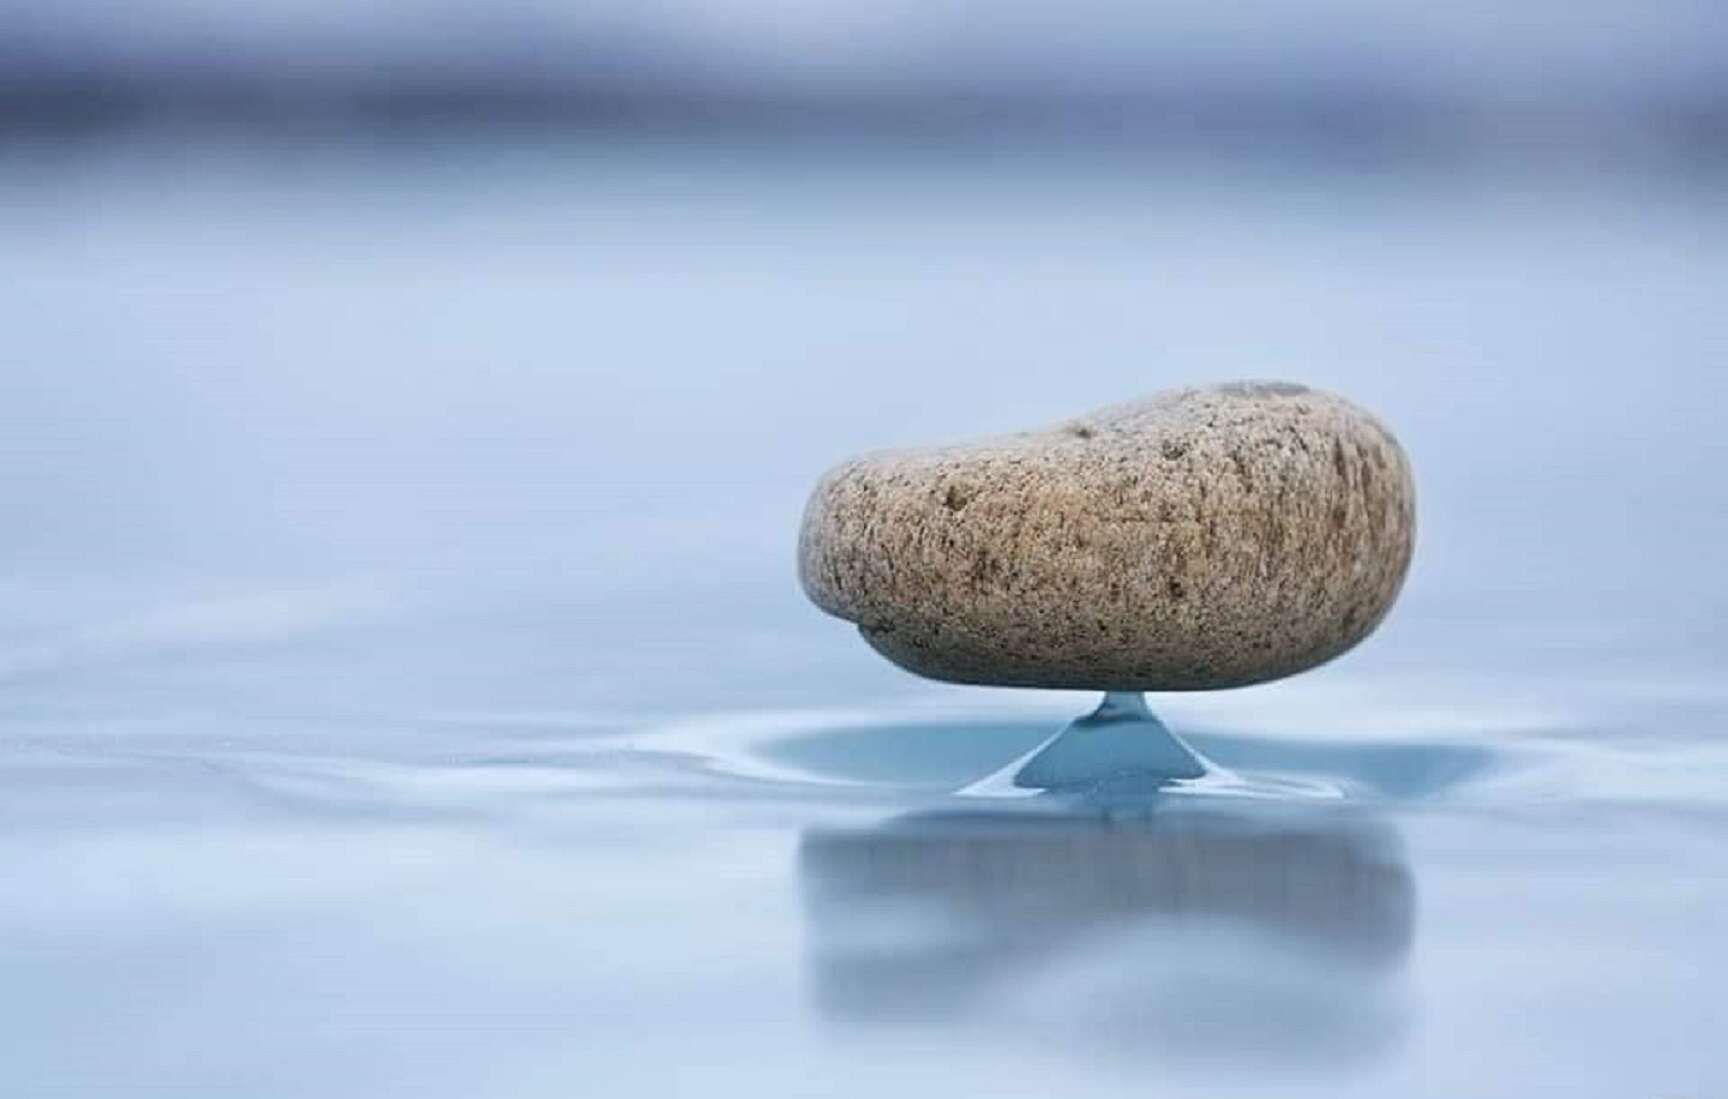 Solve the mystery of the “Zen Stones” hanging in the world’s largest lake